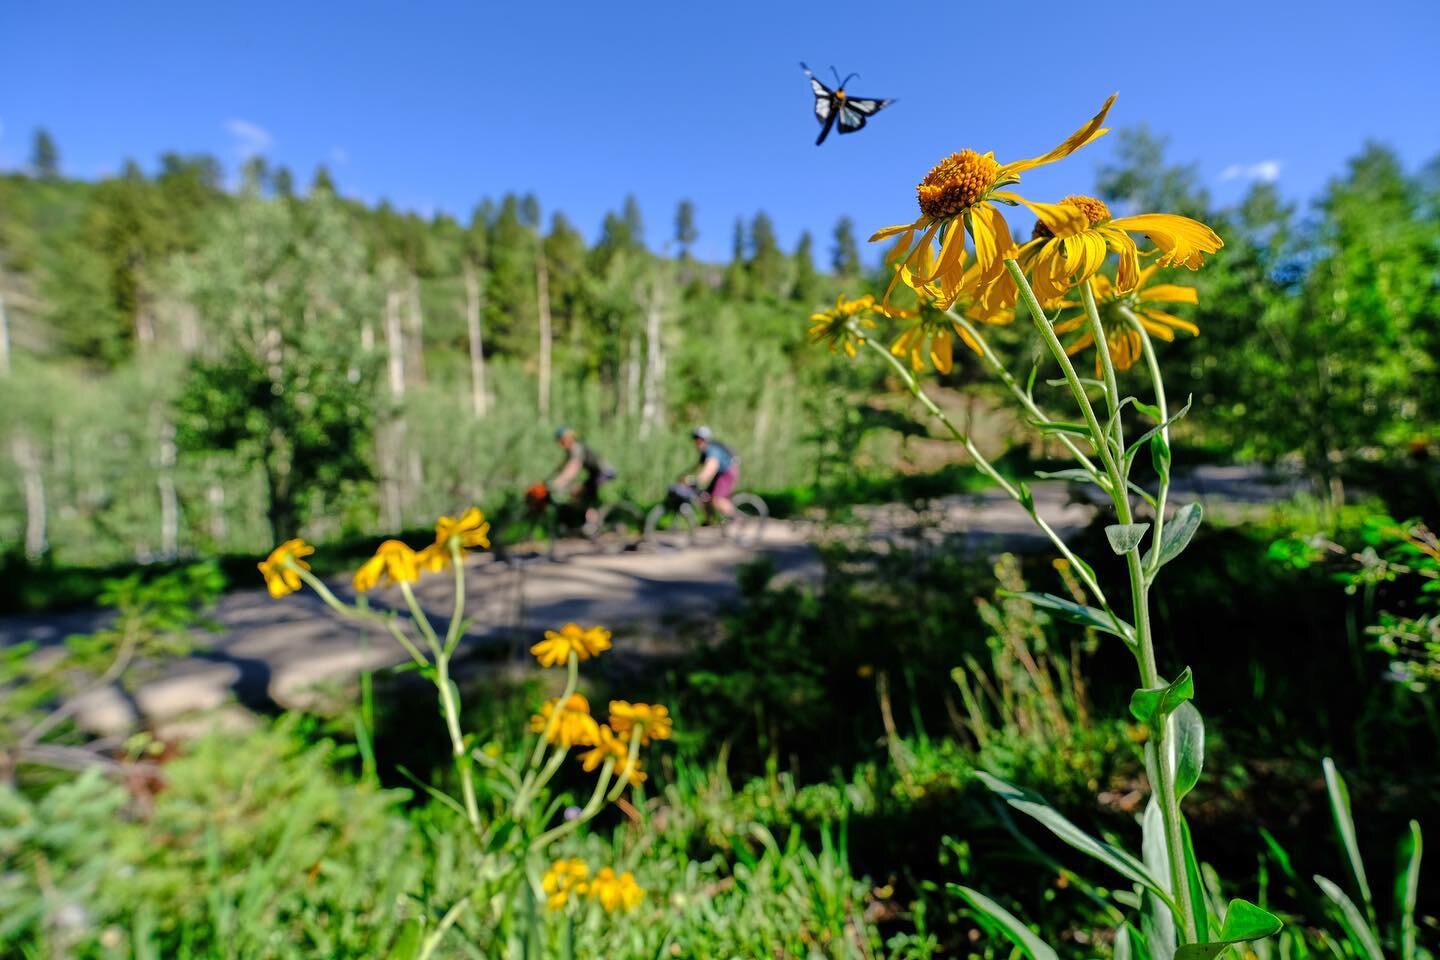 I completely lucked out in capturing this butterfly in the shot during our recent 5-day San Juan Hut bikepacking trip from Telluride to Gateway. #sanjuanhuts #telluride